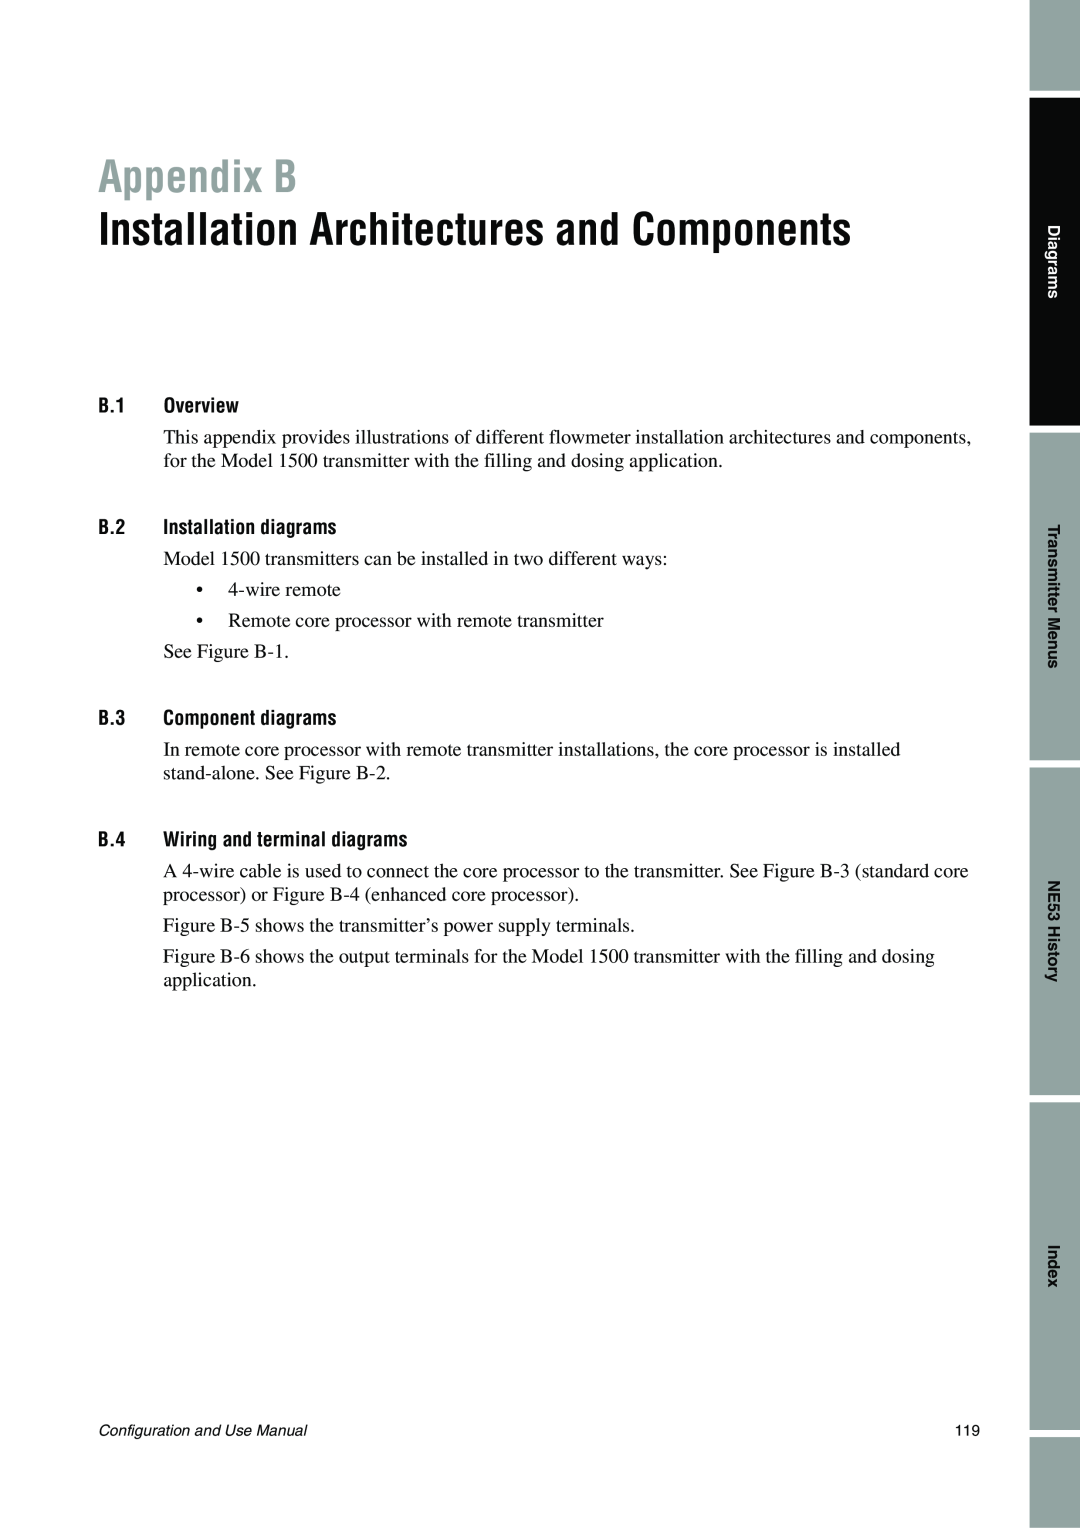 Emerson Process Management 1500 manual Appendix B, Installation Architectures and Components, B.1 Overview 